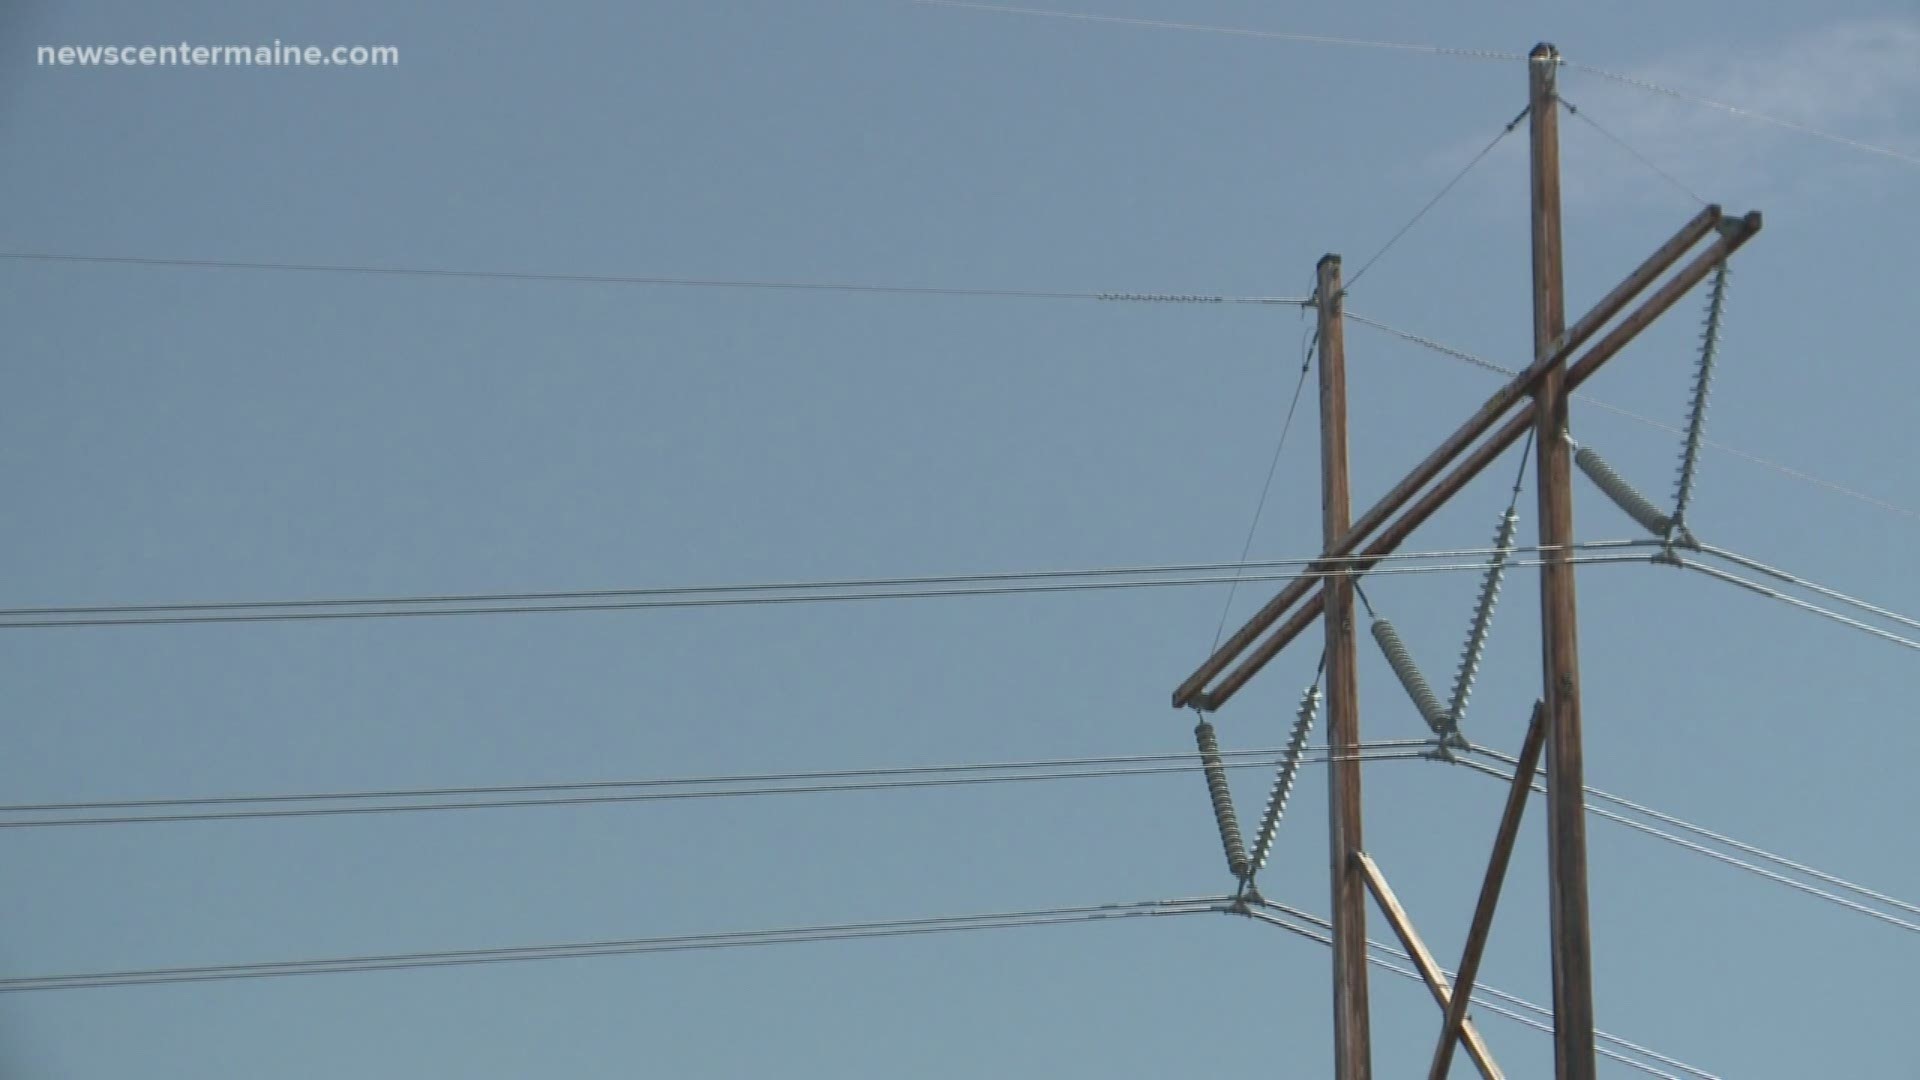 Debate over CMP's proposed power project in Maine